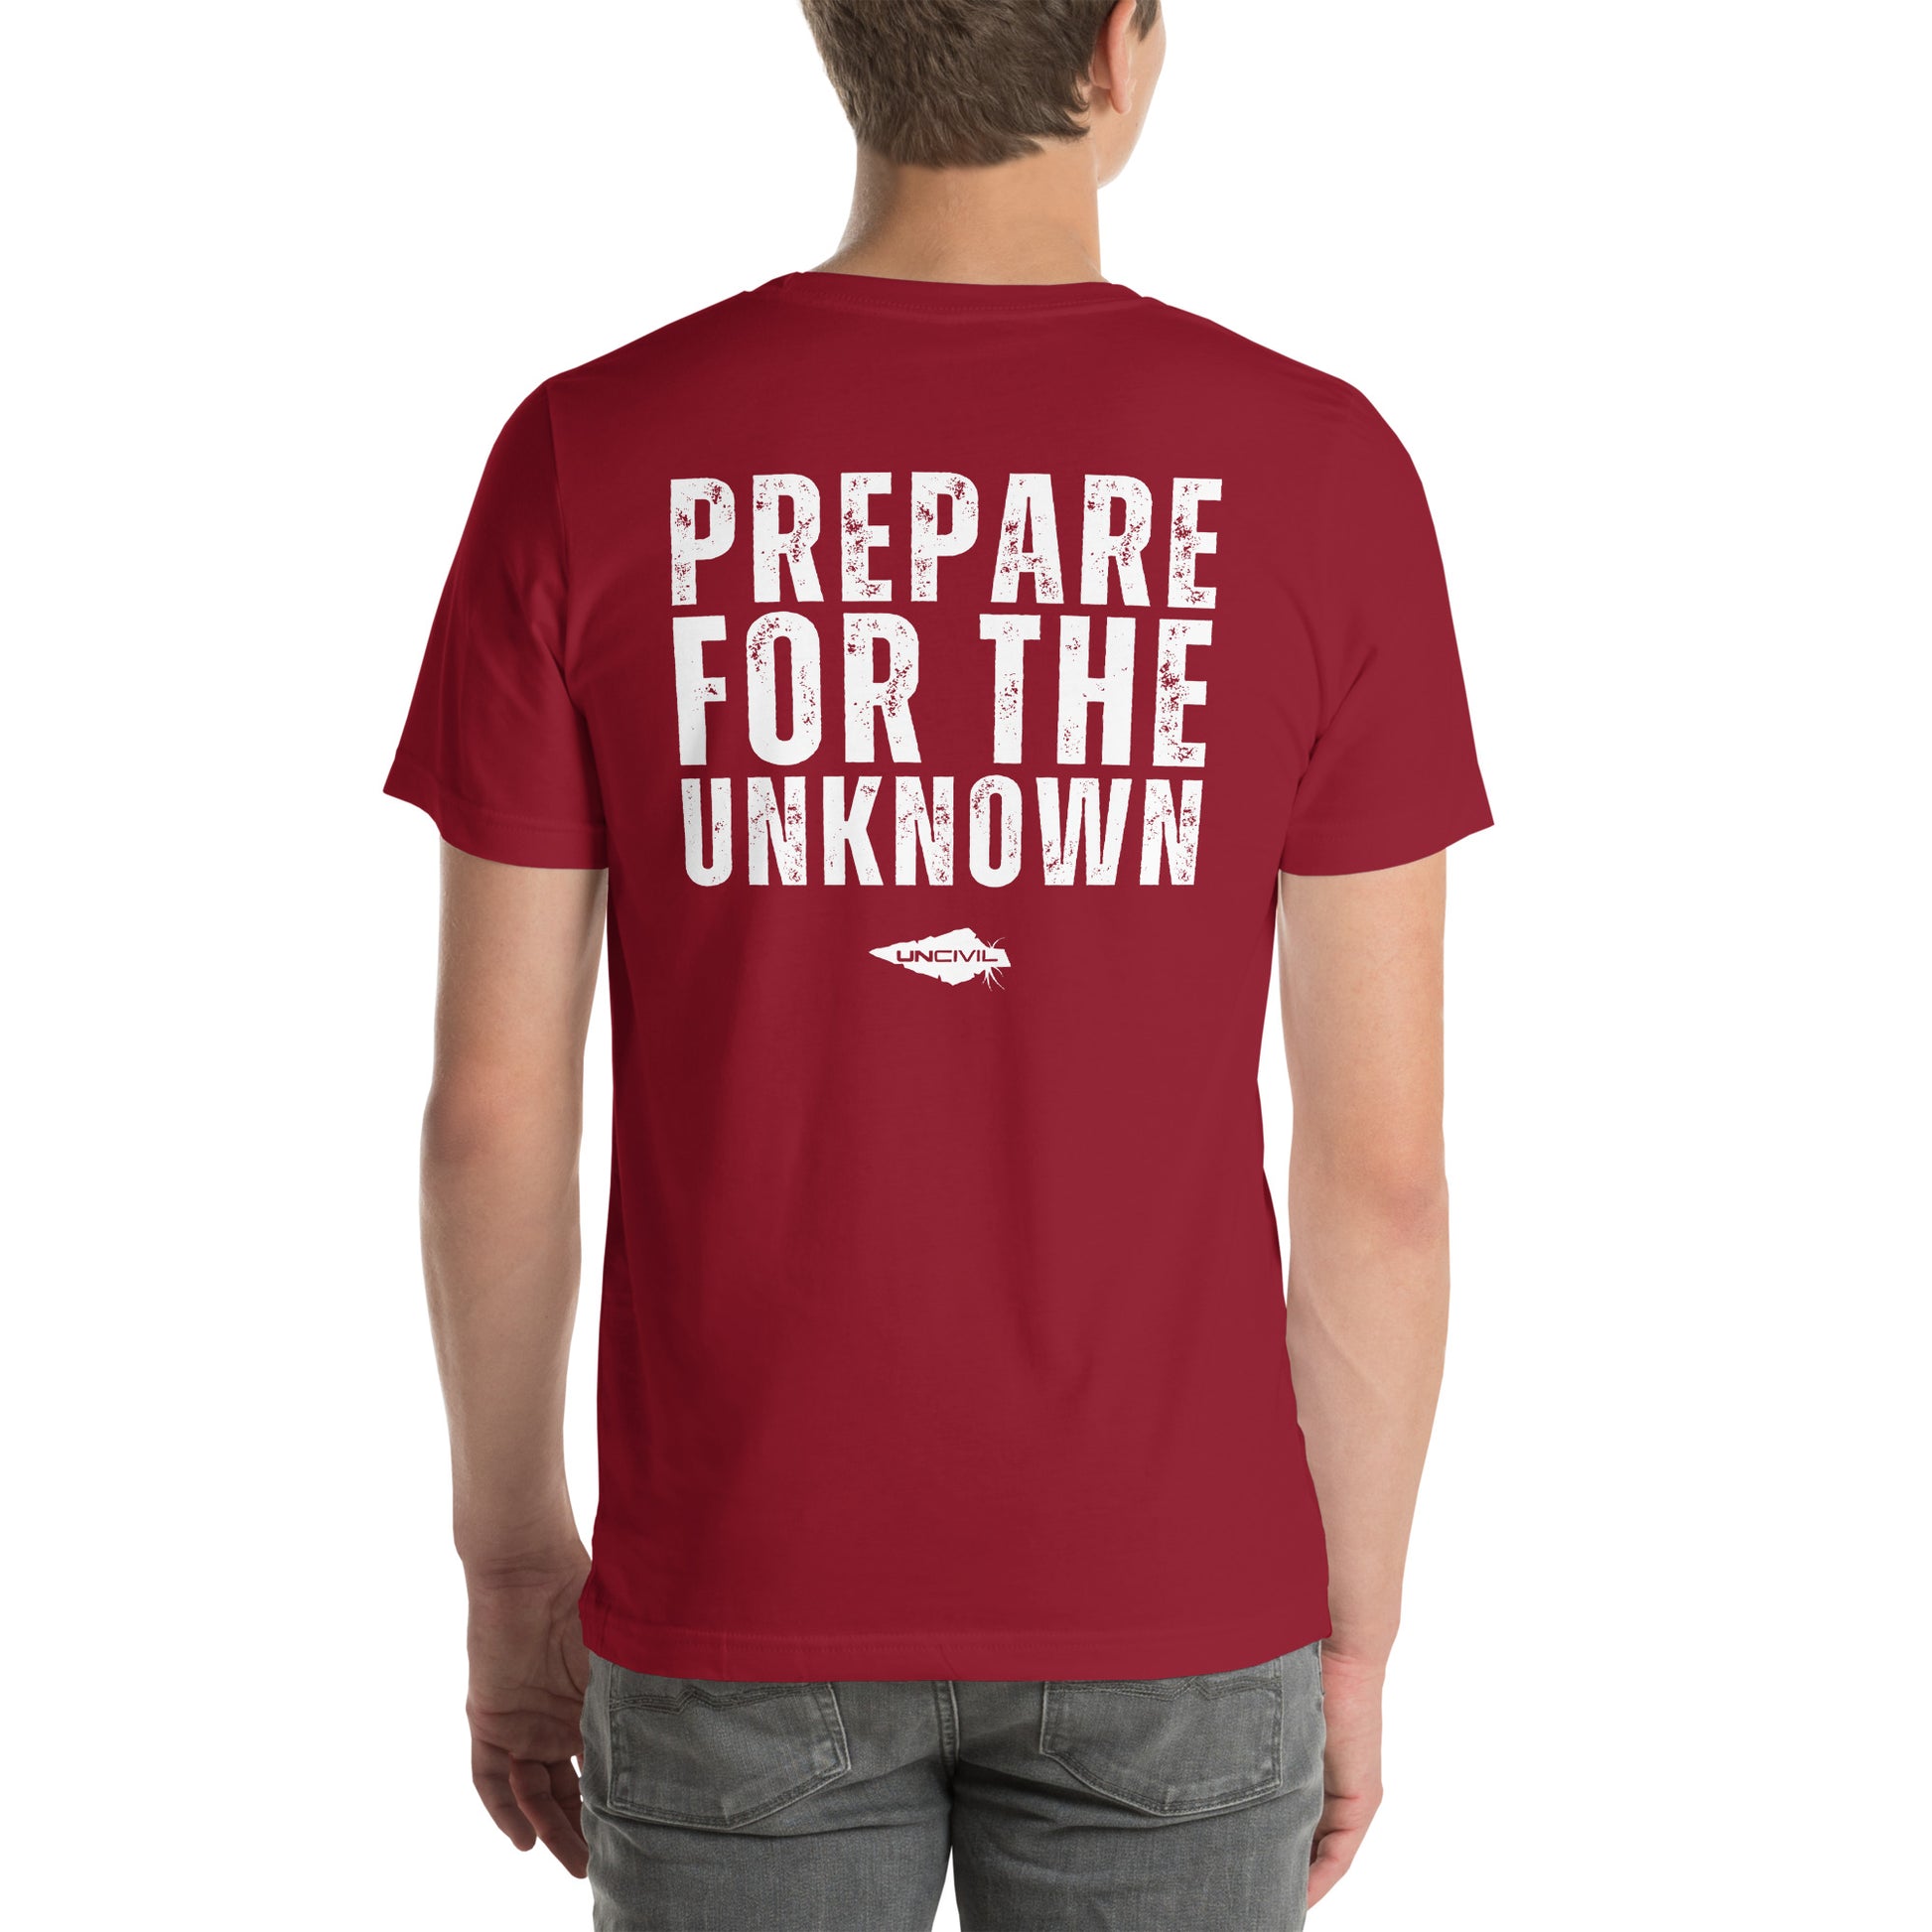 Prepare for the Unknown t-shirt UNCIVIL red